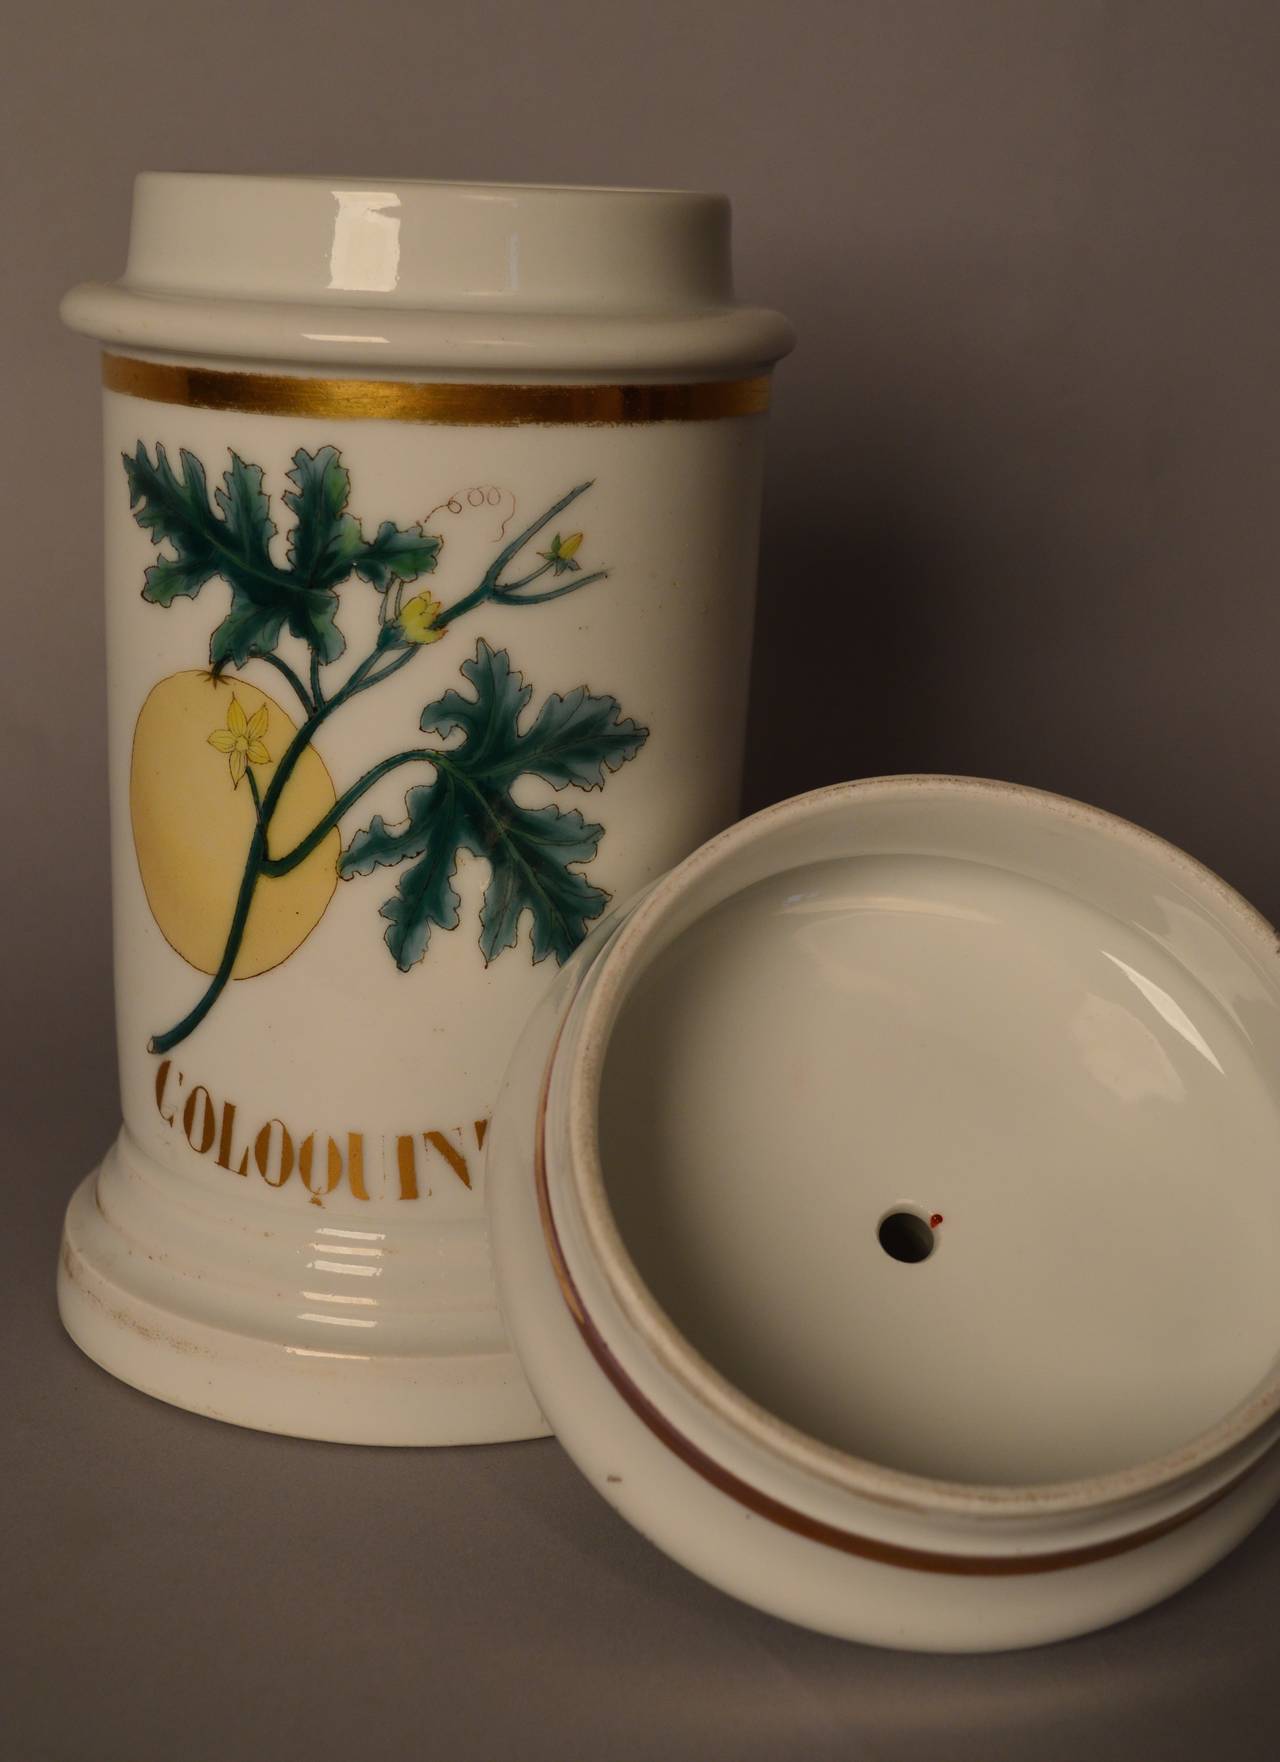 French porcelain apothecary jar with gilt trim and letters, circa 1850.
Beautifully hand-painted depiction of the coloquint fruit on the vine.